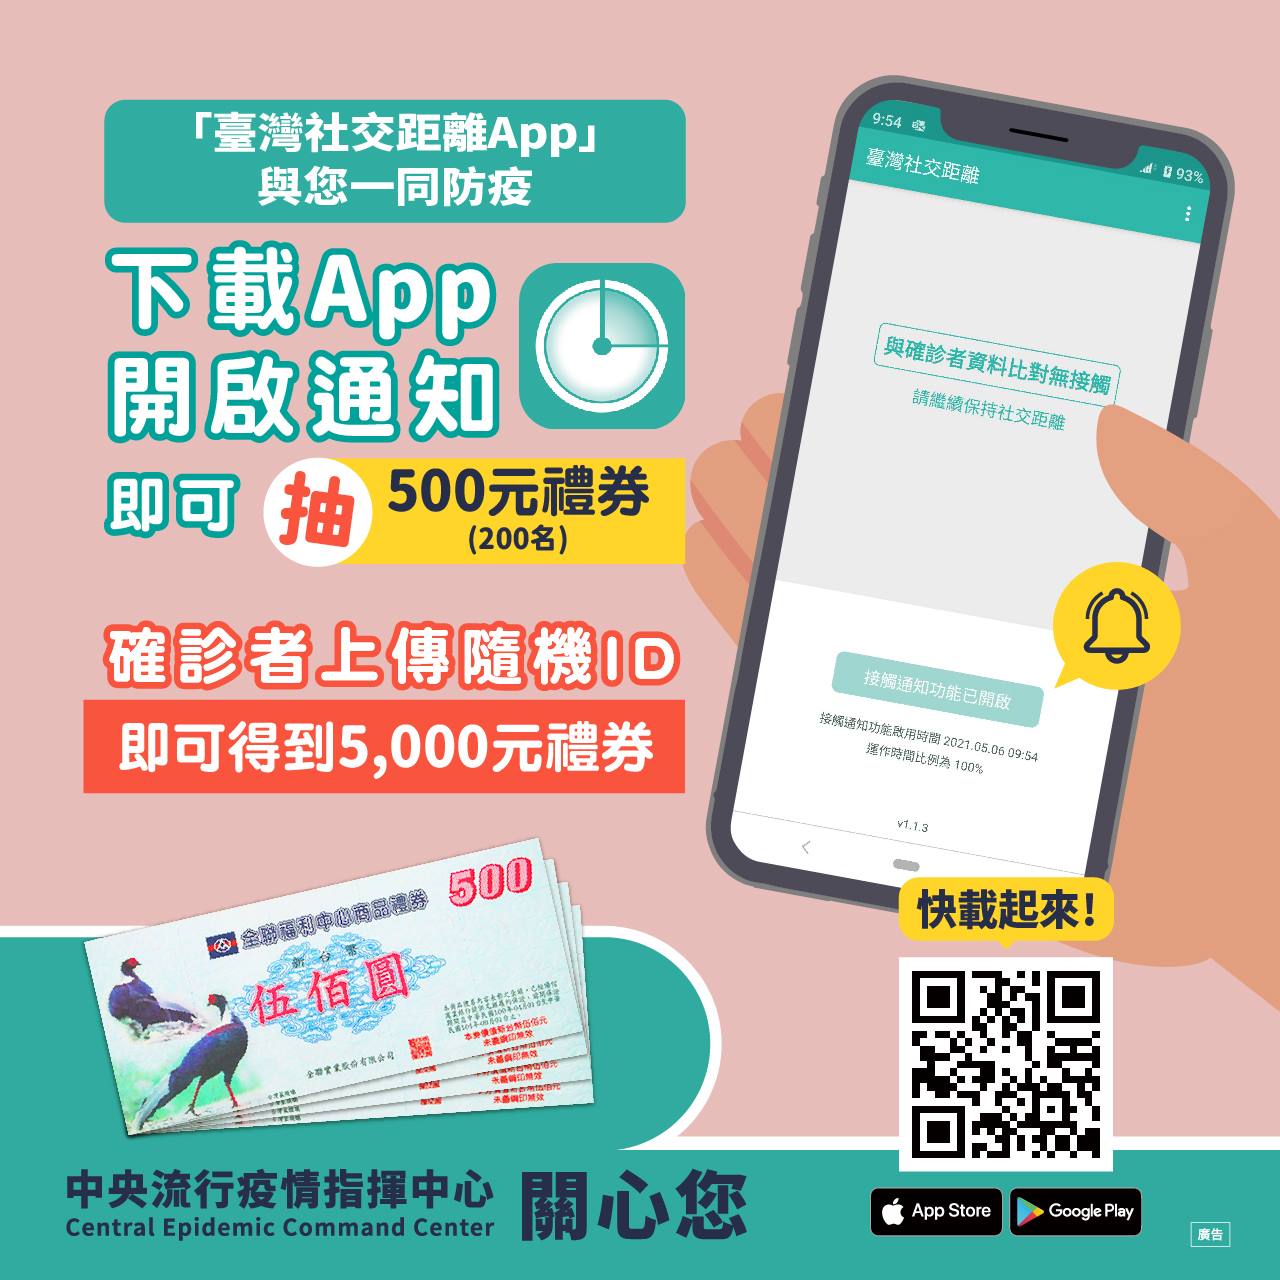 Get a chance to win NT$500 pxmart coupon for downloading Social Distancing App